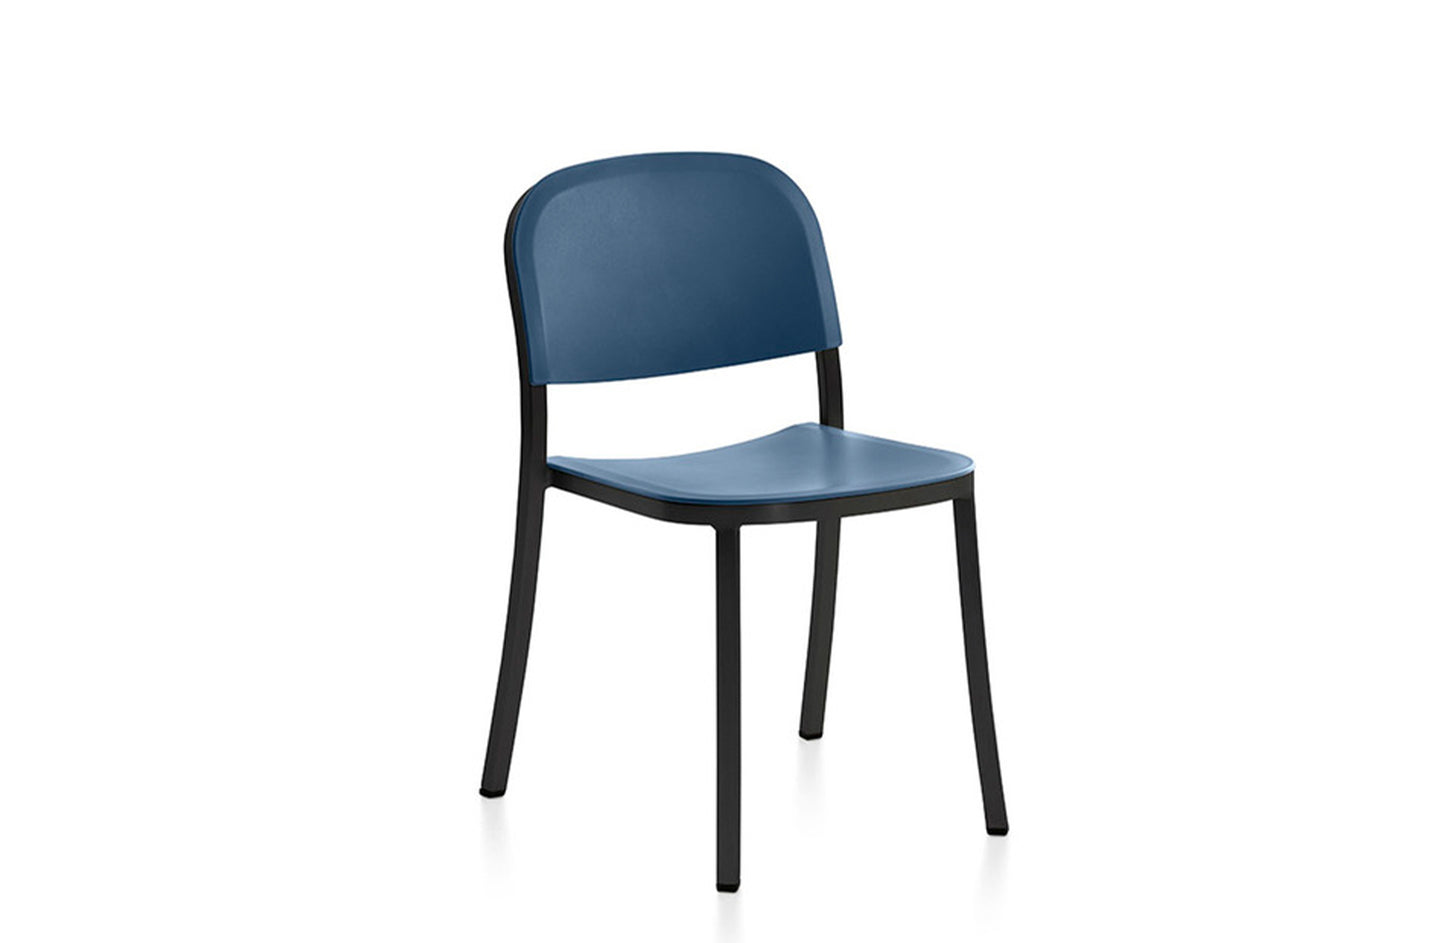 1 Inch Chair
